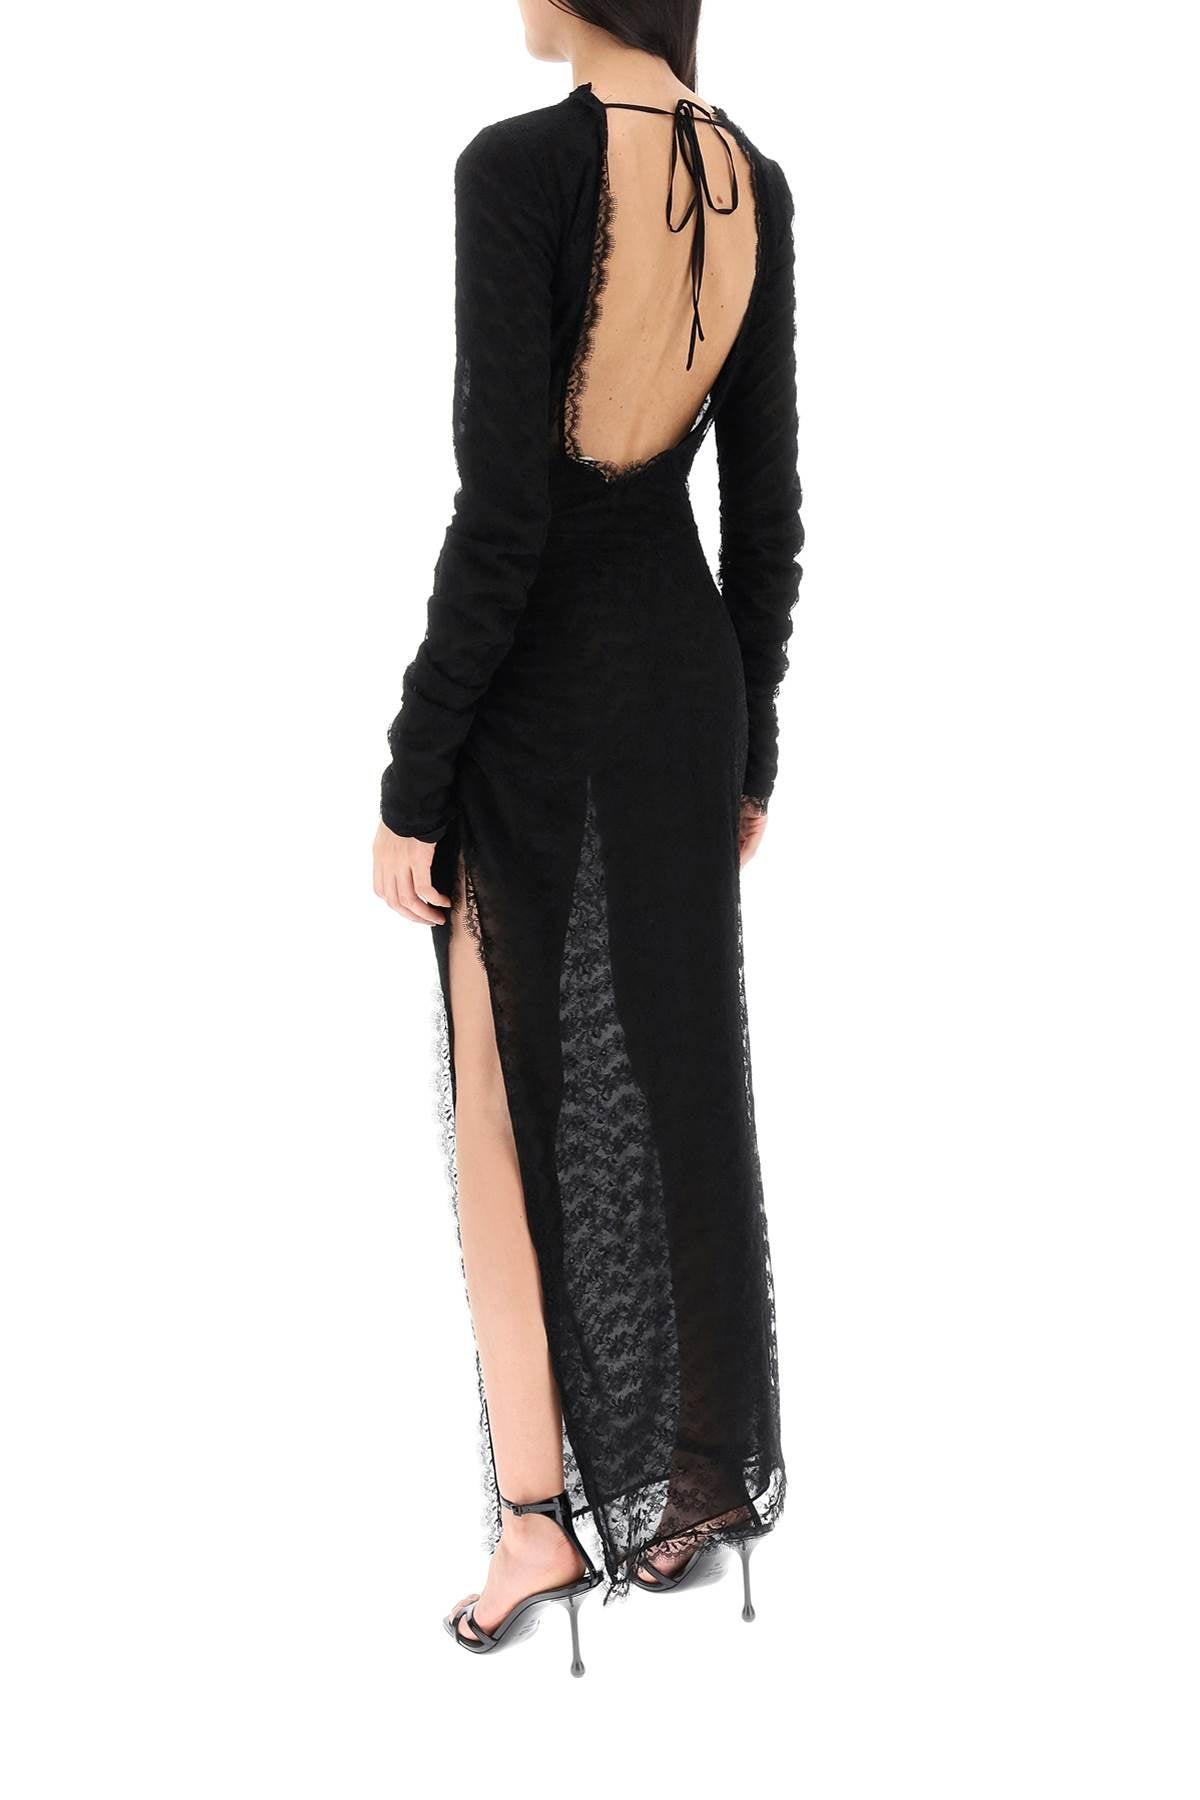 Alessandra rich long lace gown-women > clothing > dresses > maxi-Alessandra Rich-40-Black-Urbanheer